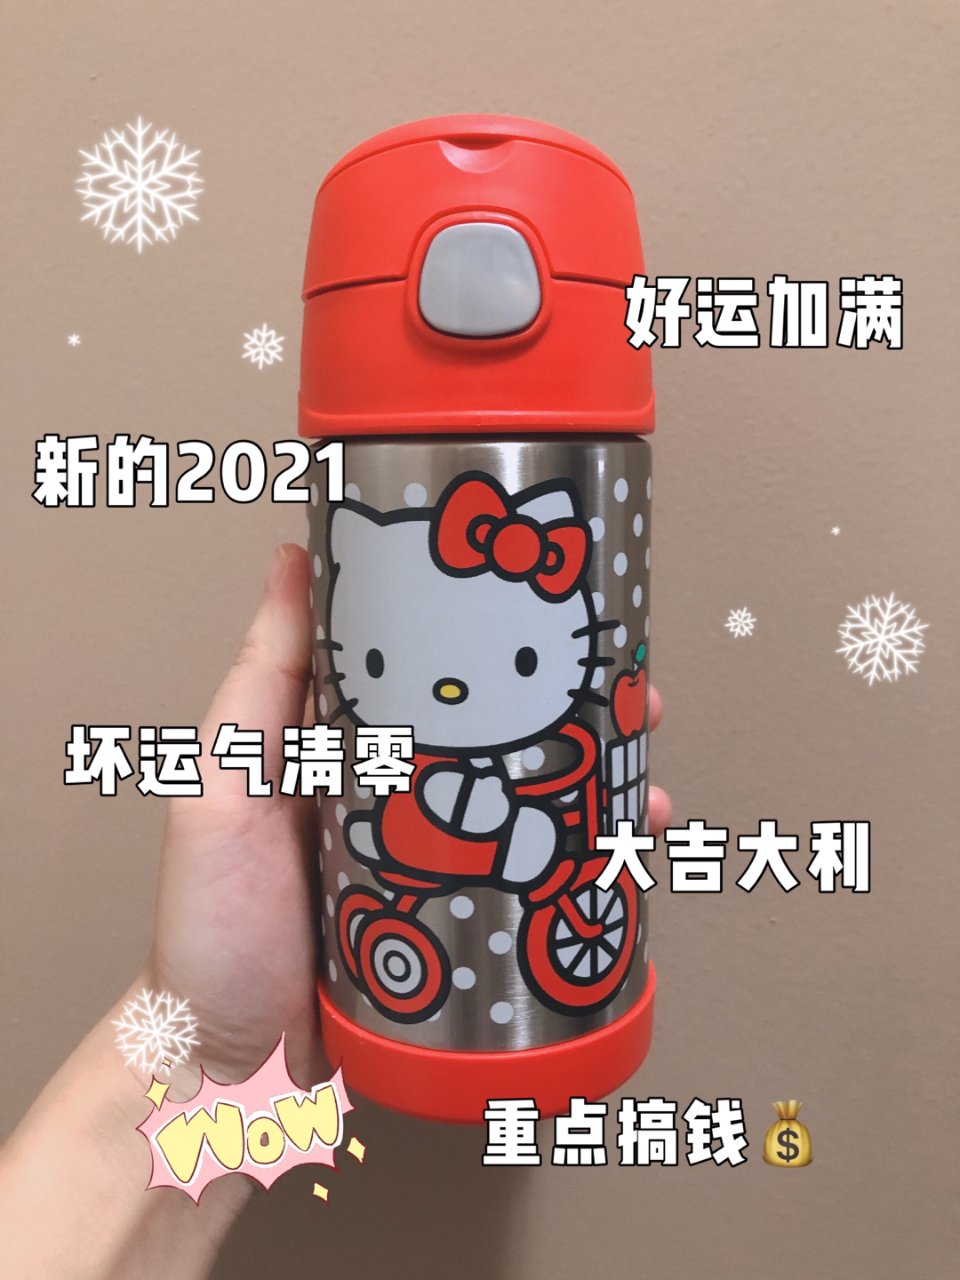 sippy cup哪家强｜倒计时11/2...